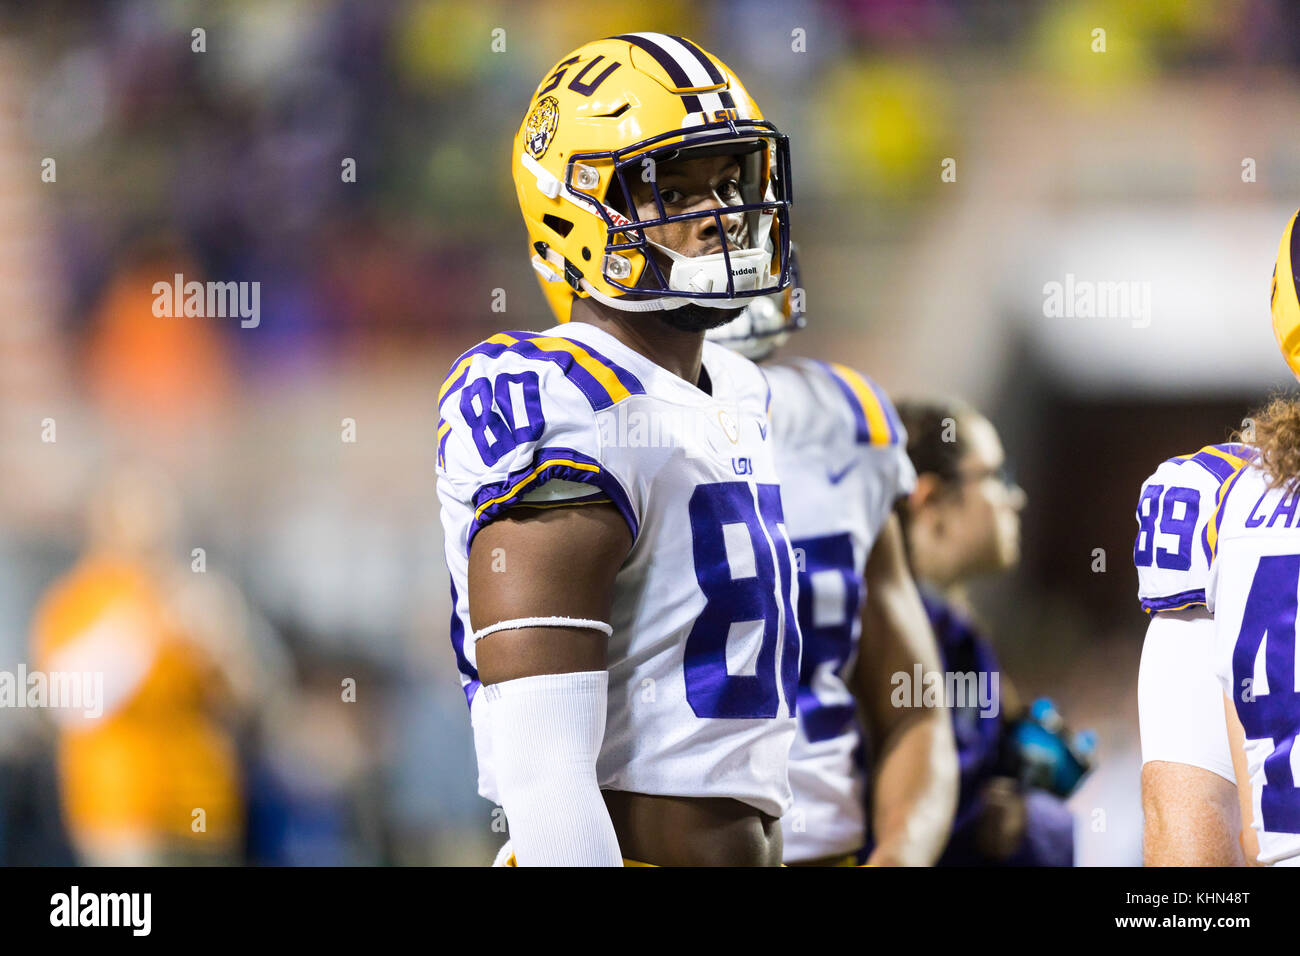 November 18, 2017: Jamal Pettigrew #80 of the LSU Tigers before the NCAA football game between the University of Tennessee Volunteers and the Louisiana State University Tigers at Neyland Stadium in Knoxville, TN Tim Gangloff/CSM Stock Photo